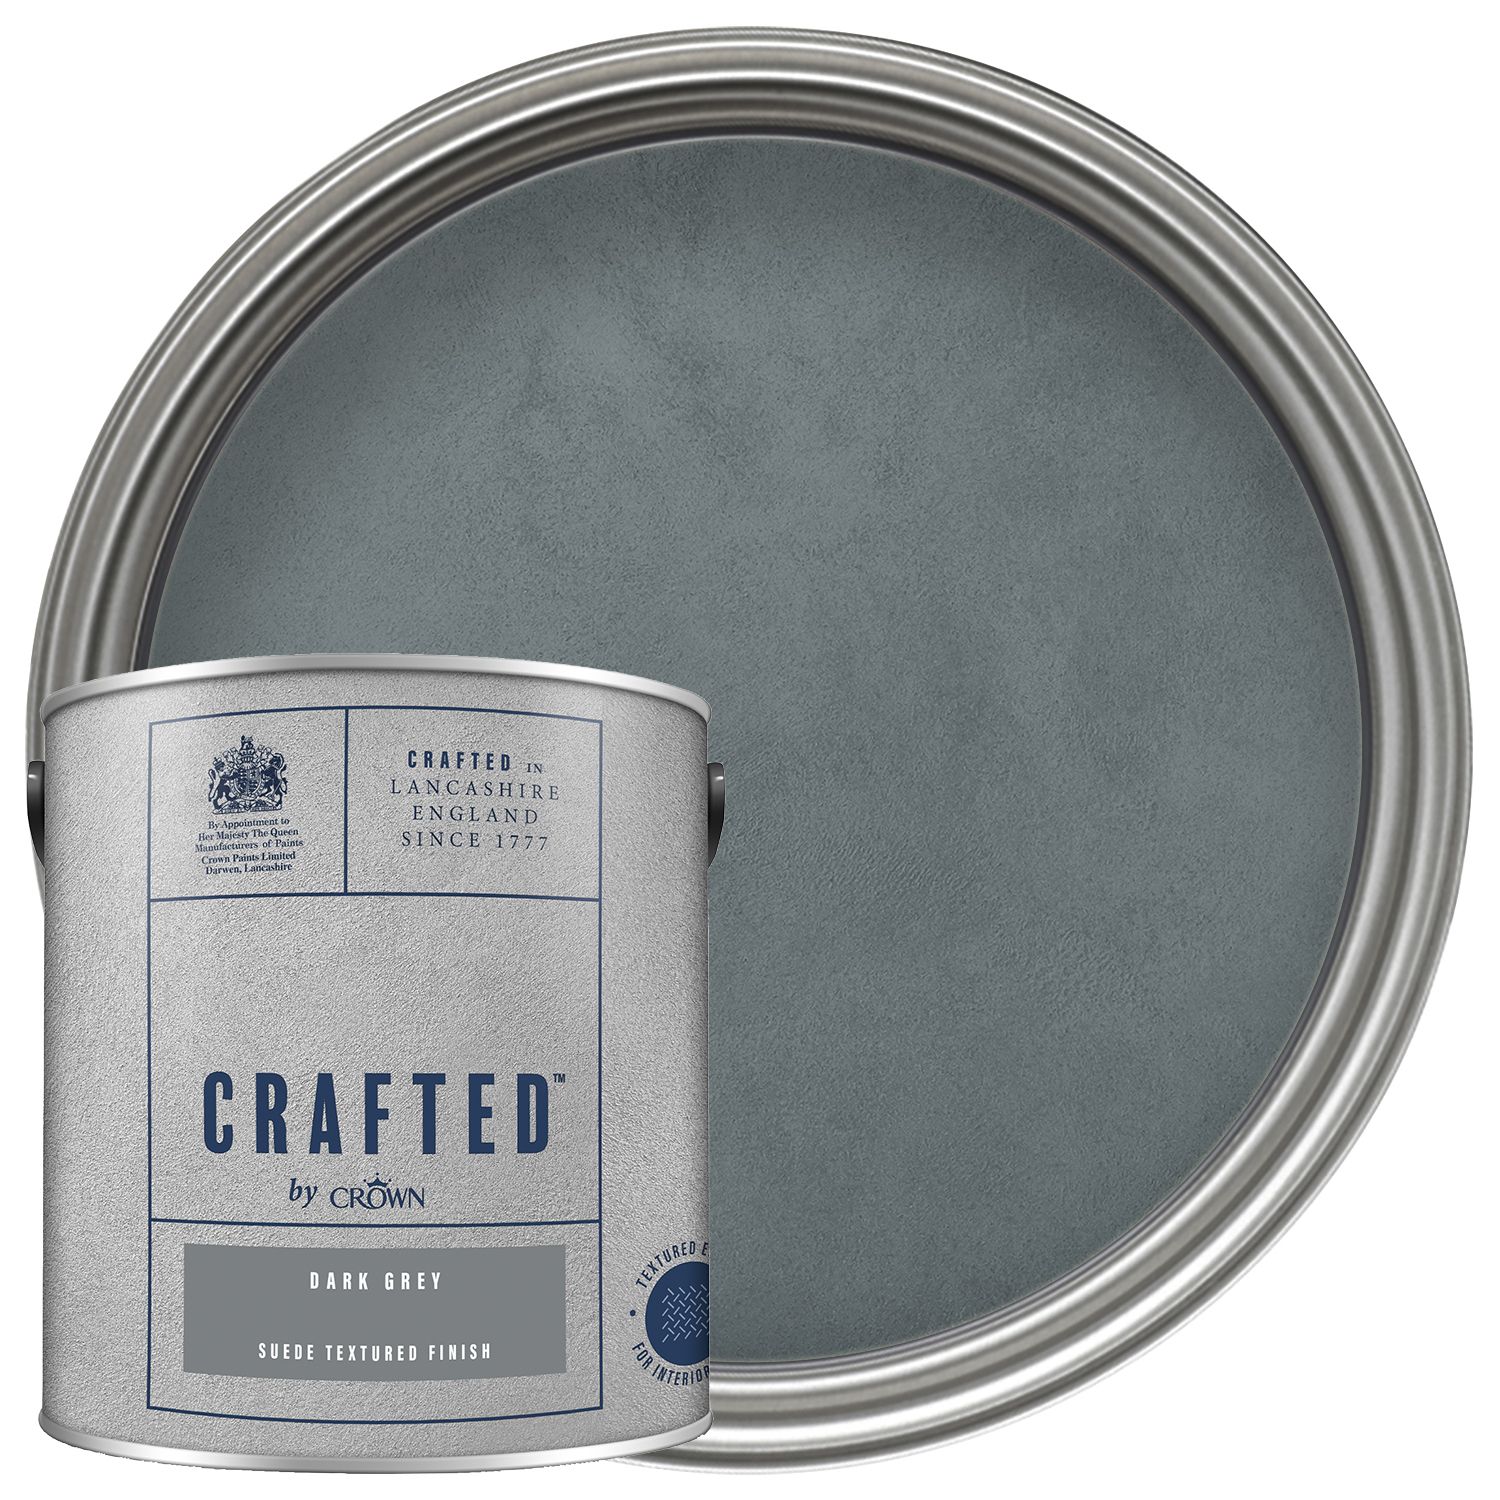 Image of CRAFTED™ by Crown Emulsion Interior Paint - Textured Dark Grey™ - 2.5L